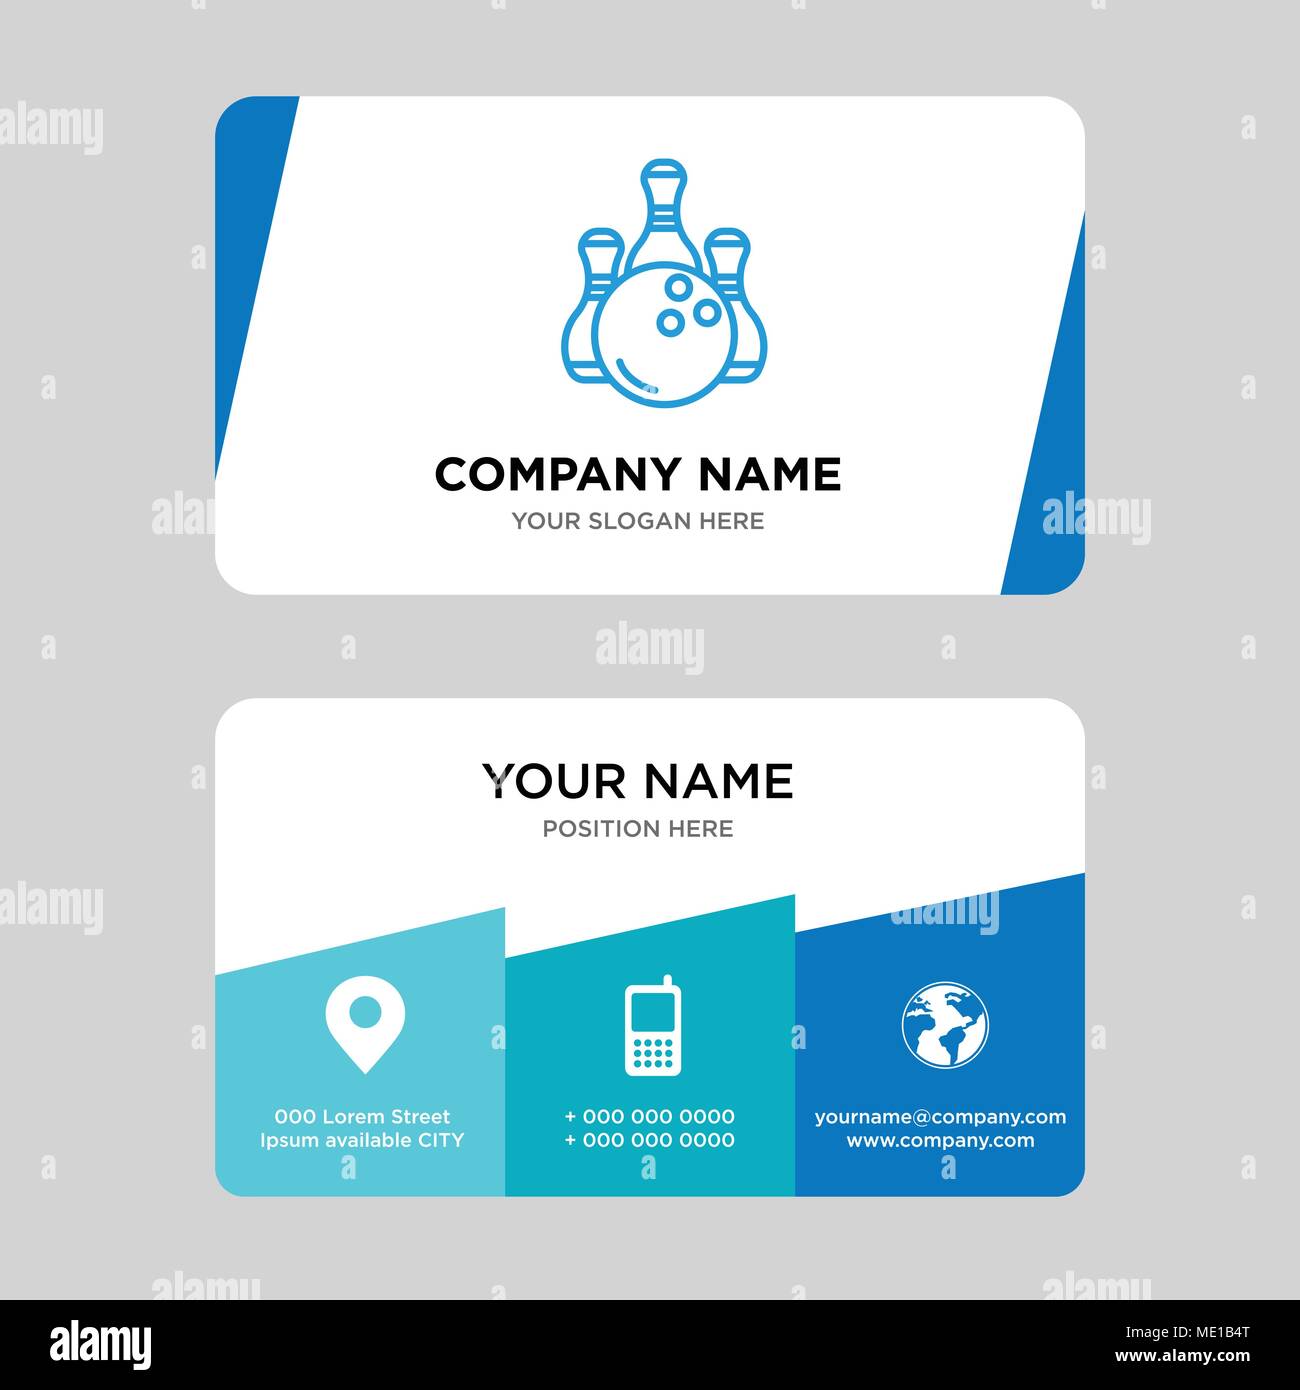 Bowling business card design template, Visiting for your company, Modern Creative and Clean identity Card Vector Illustration Stock Vector